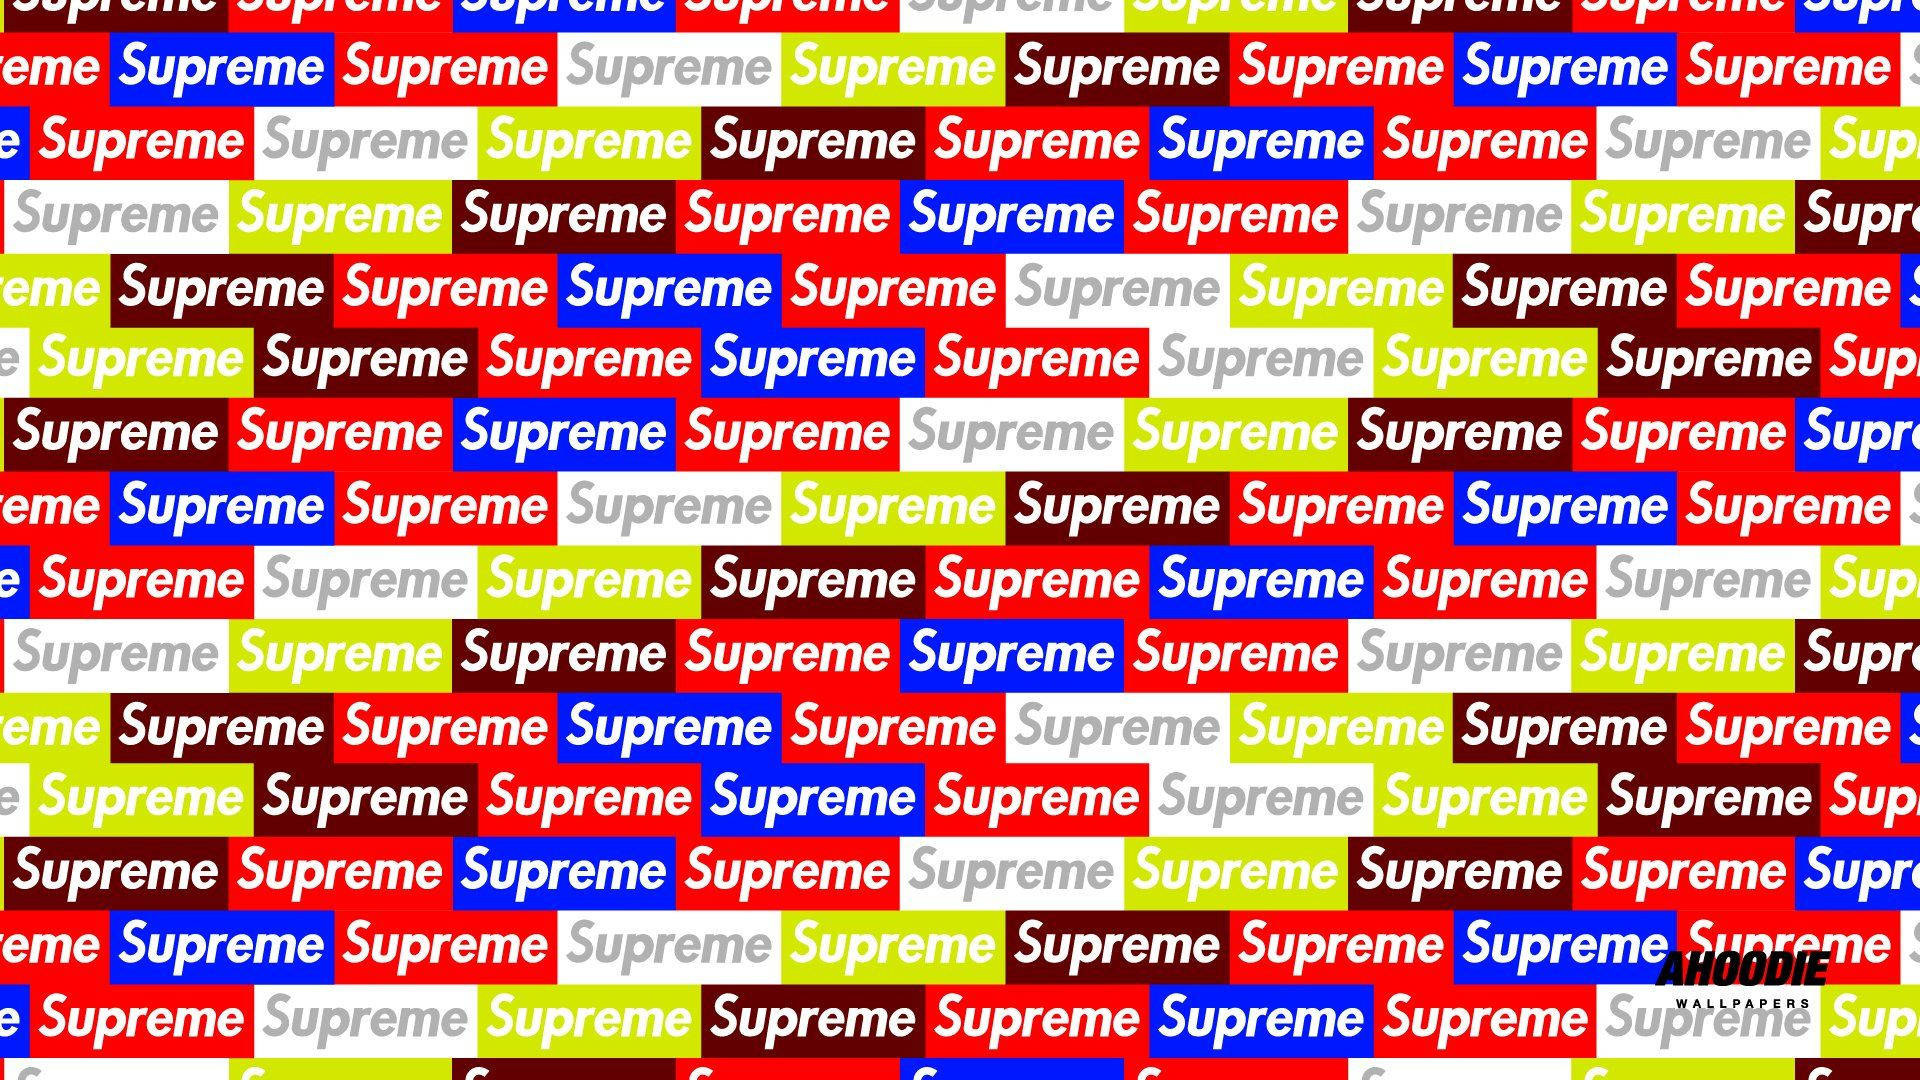 Supreme 1920X1080 Wallpaper and Background Image